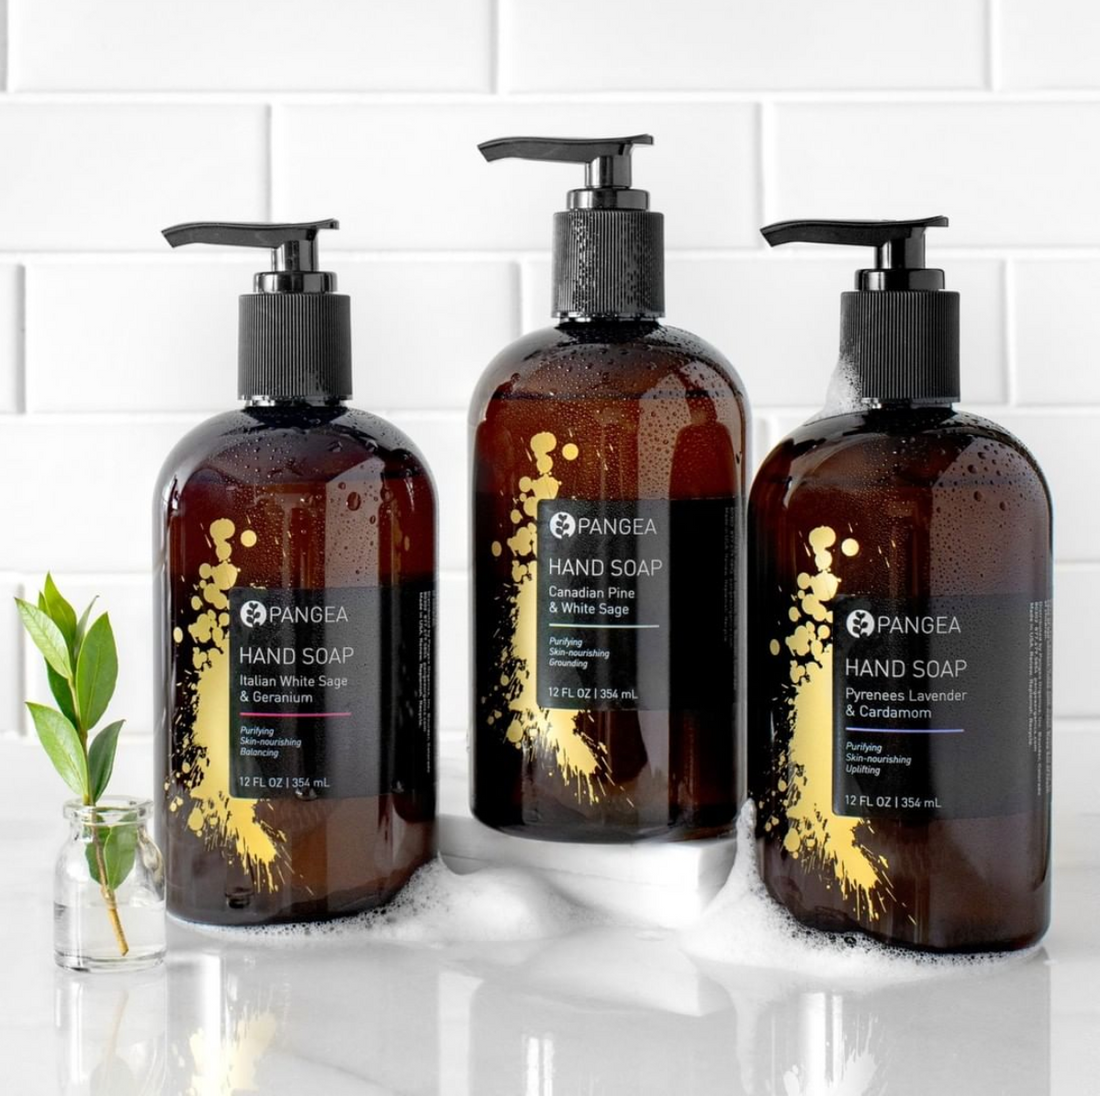 Pause, breathe, and nourish yourself with a satisfying hand-washing experience.